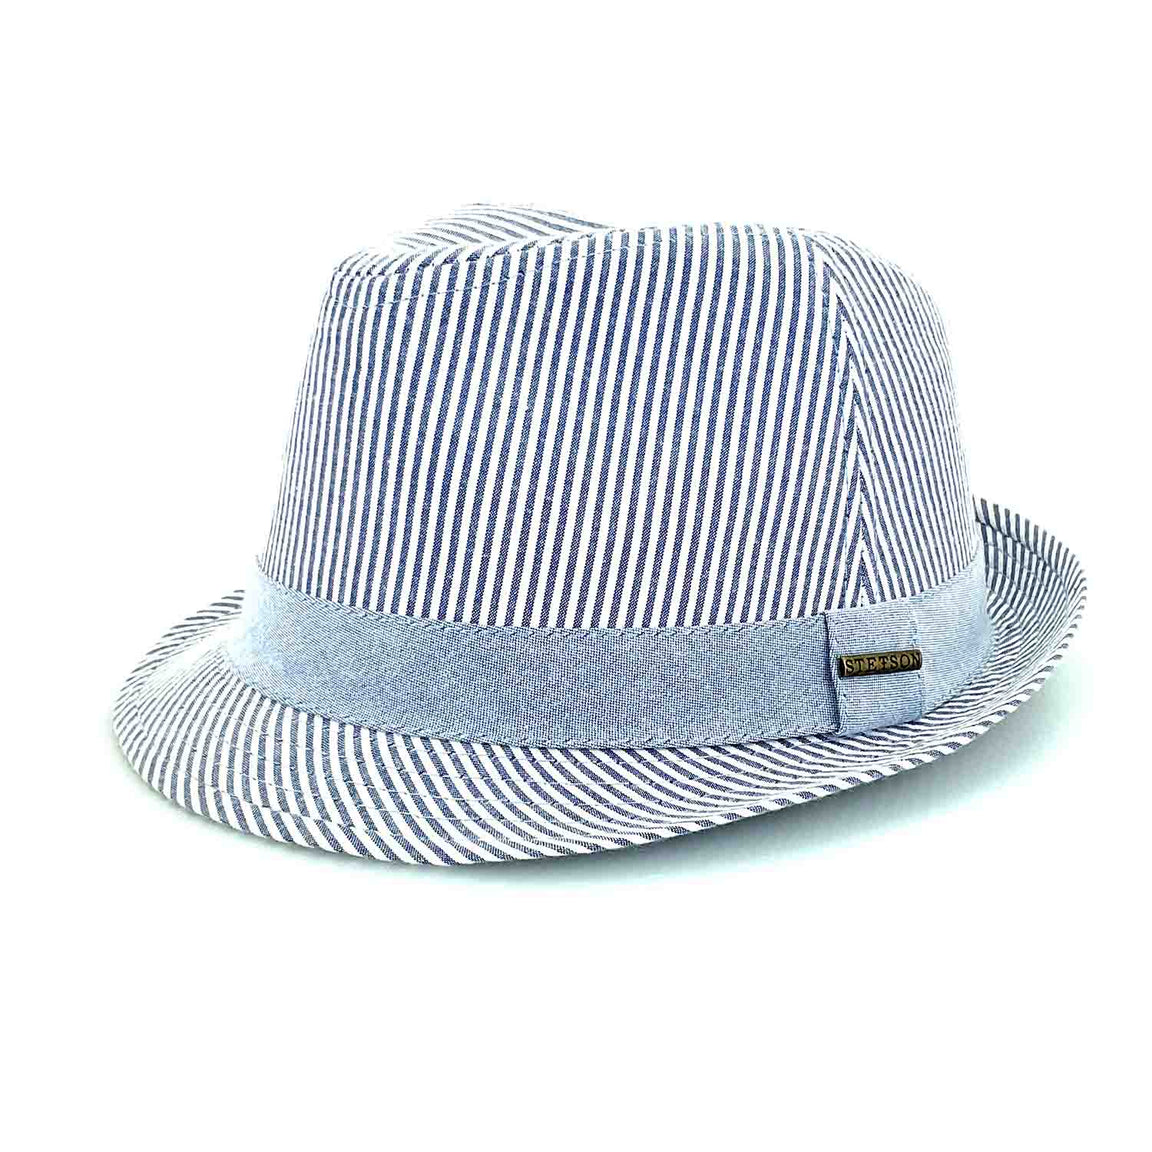 Men's Hats - Classic Men's Hat Styles to the Latest Hat Trends ...